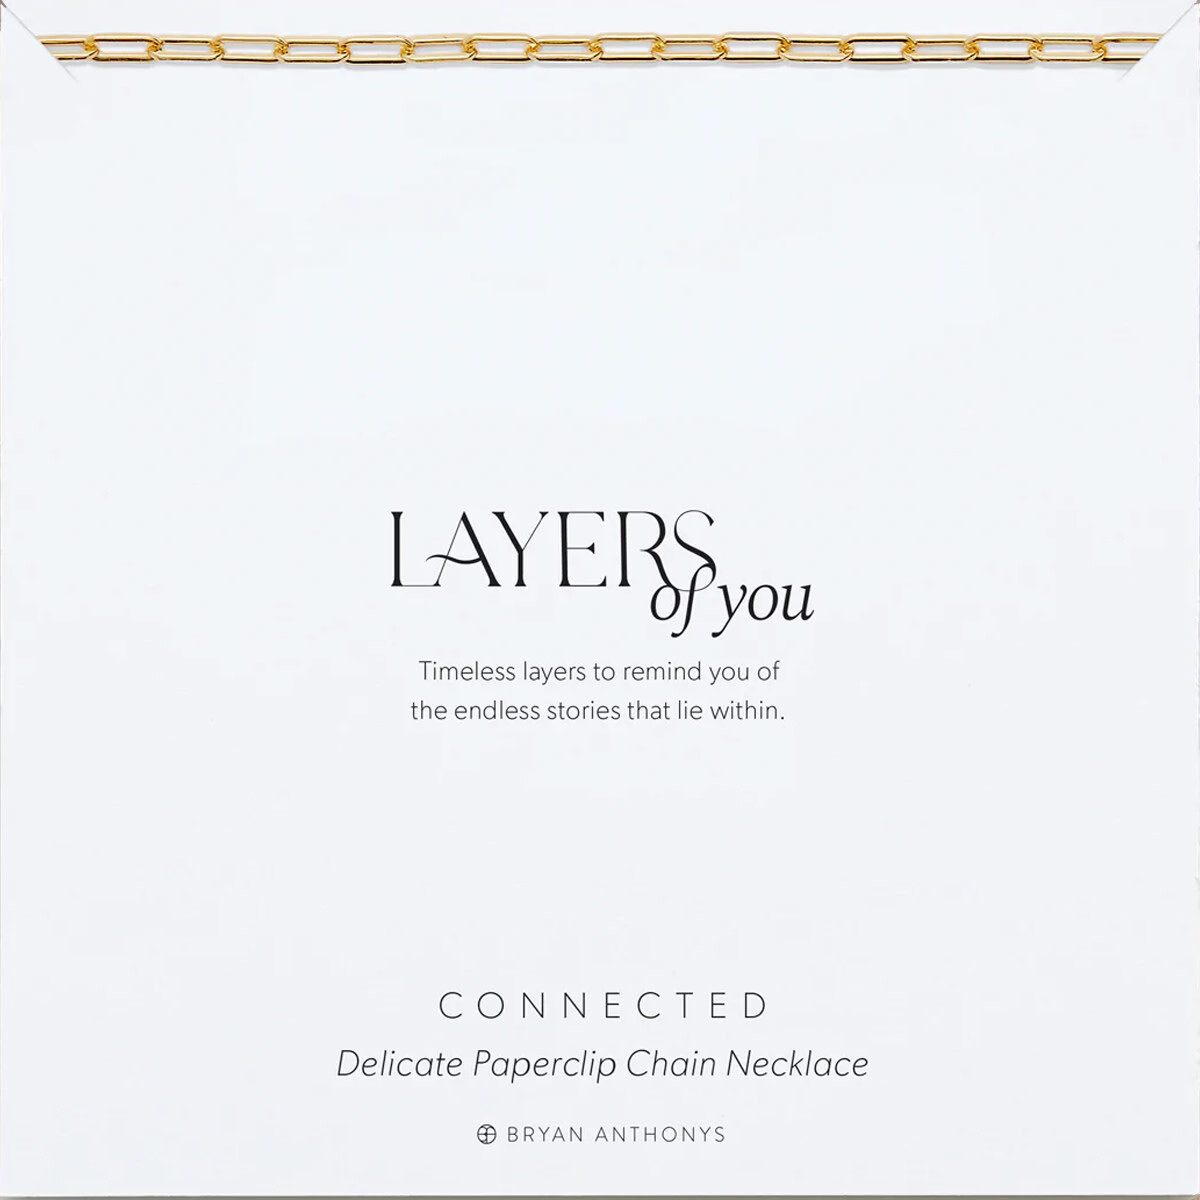 Bryan Anthonys Connected Delicate Paperclip Chain Necklace